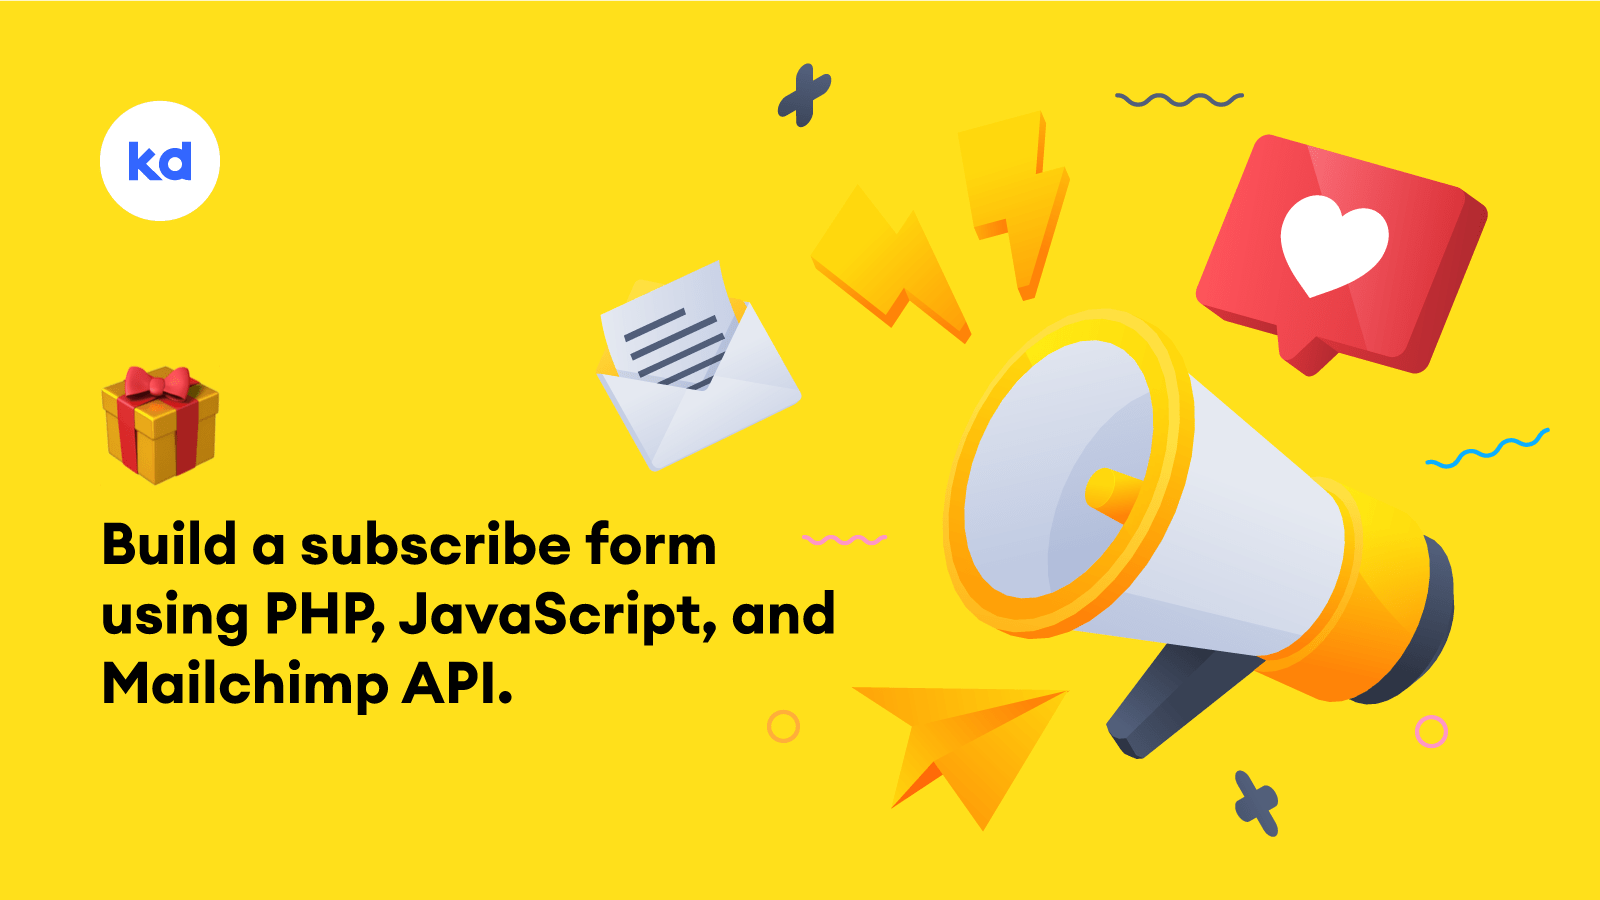 Build a subscribe form using PHP, JavaScript, and Mailchimp API.